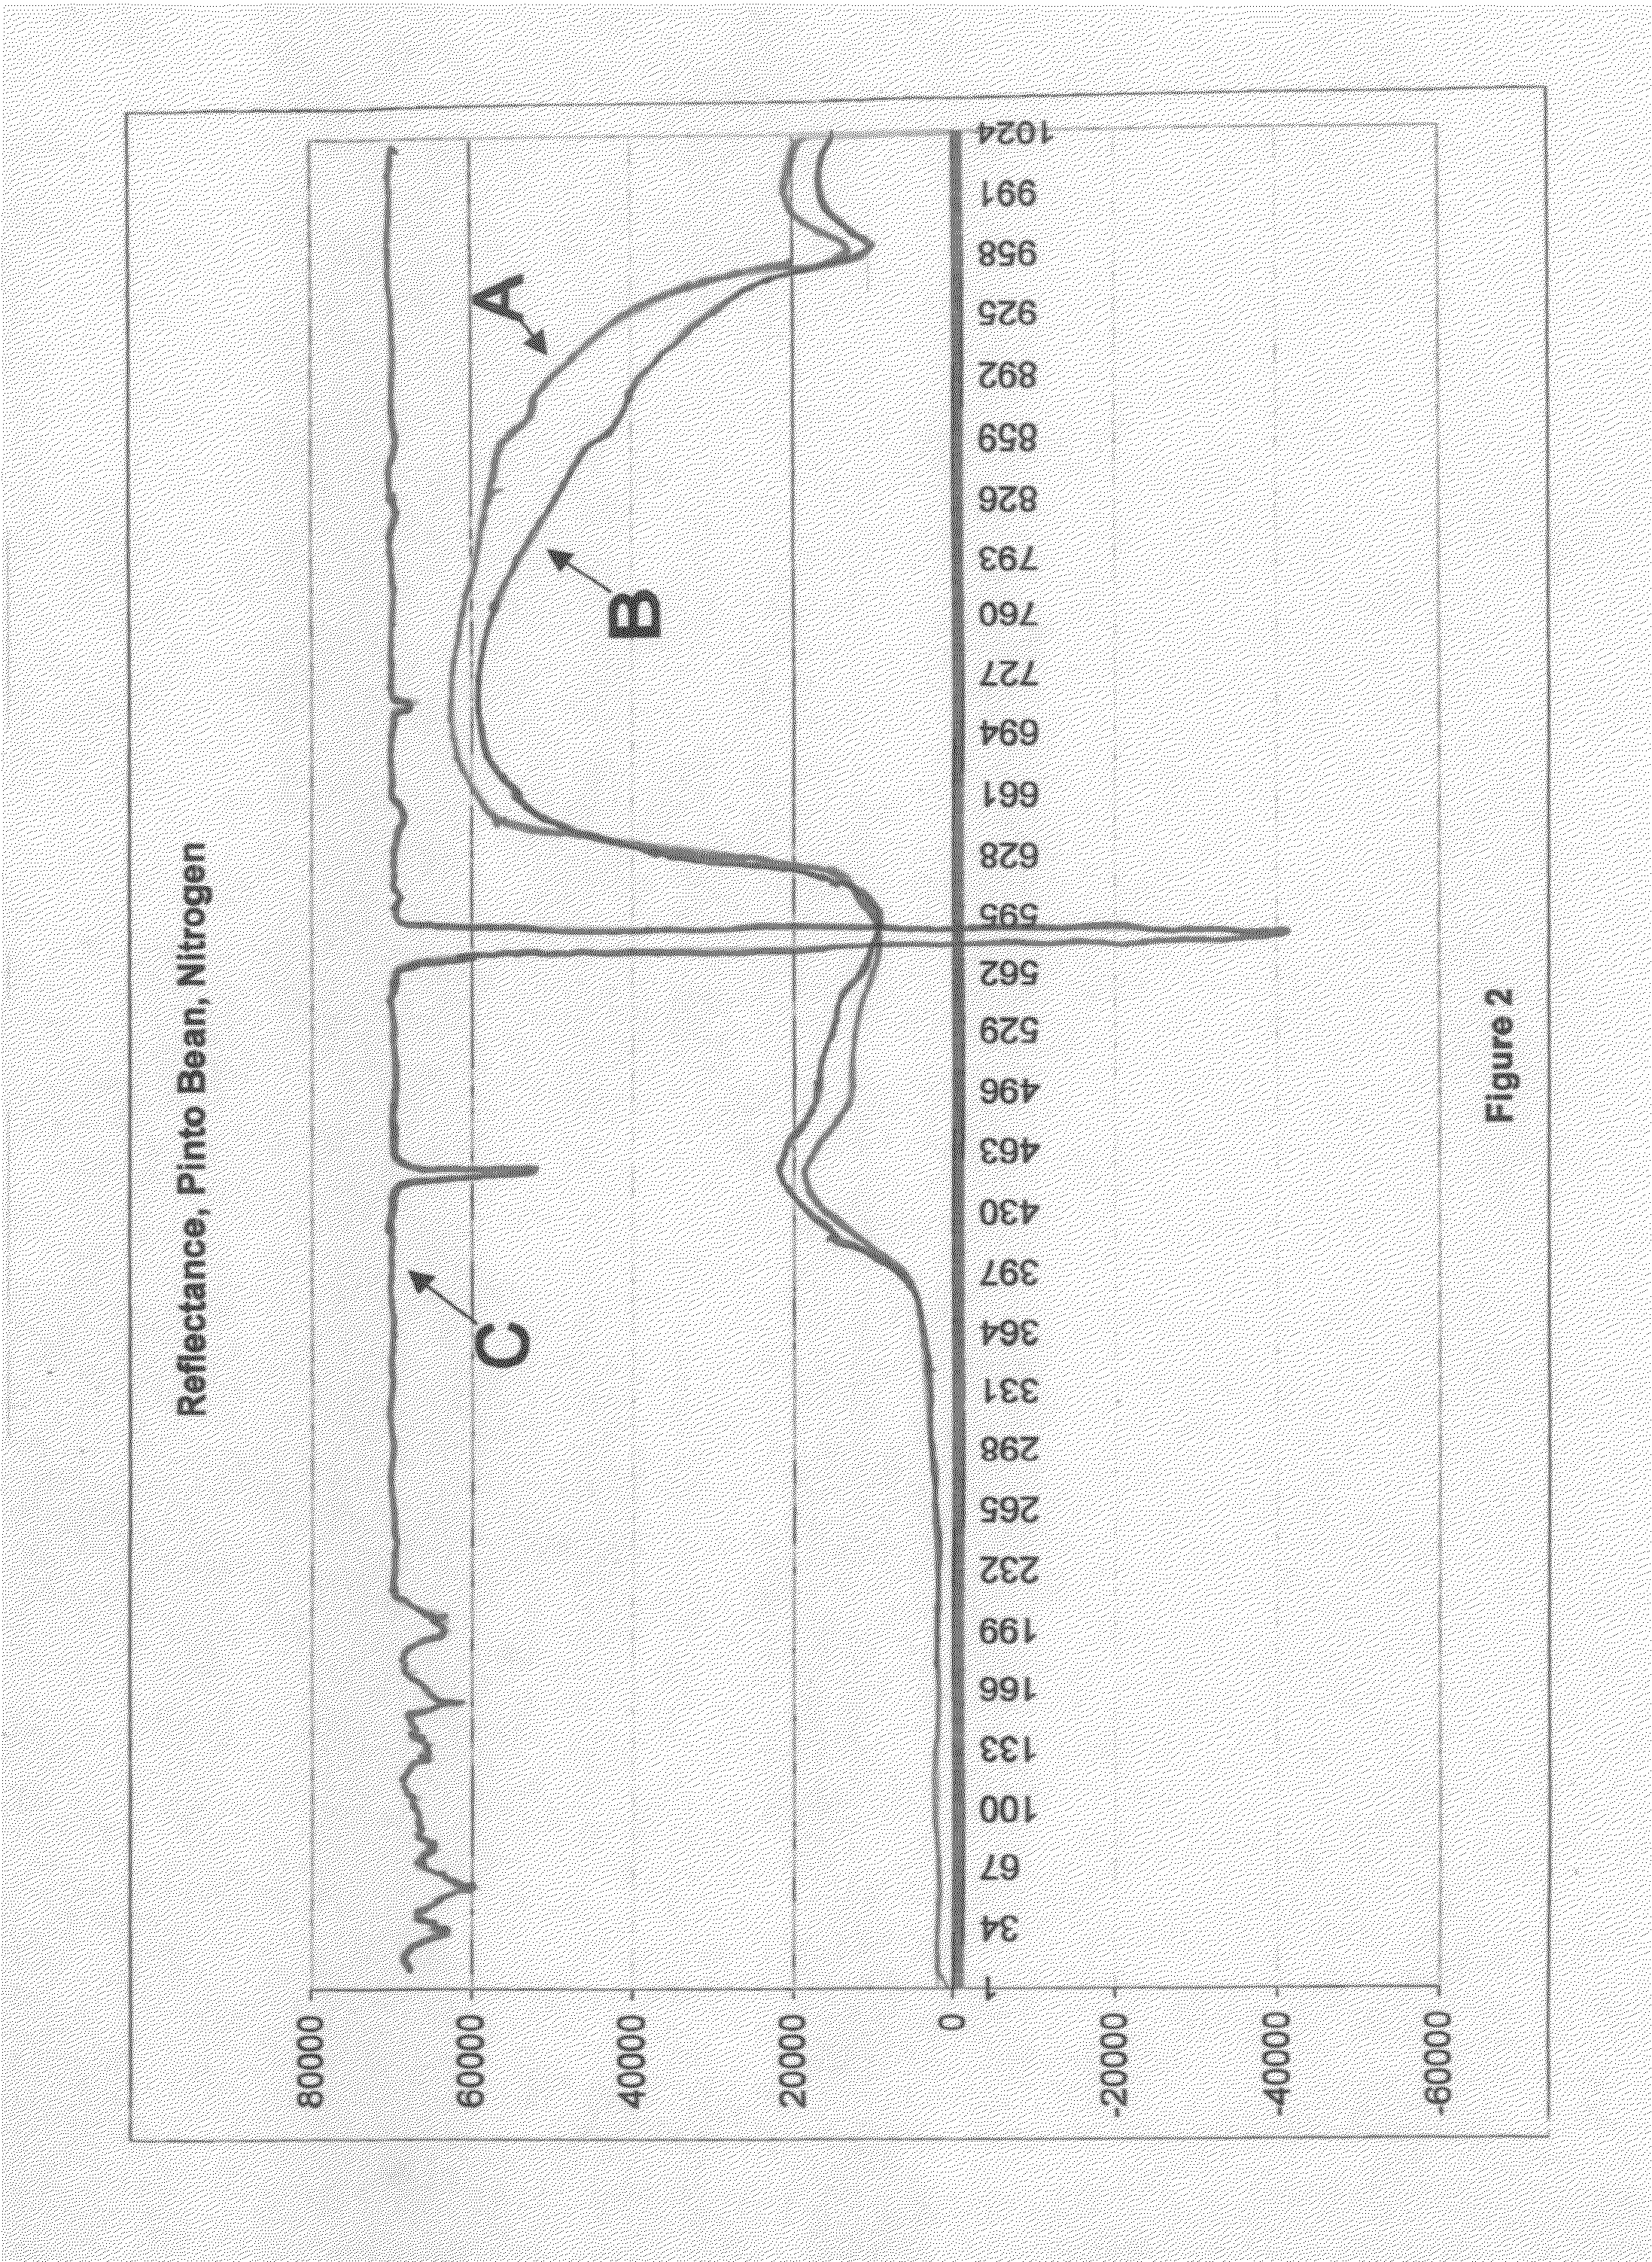 Methods of enhancing agricultural production using spectral and/or spatial fingerprints